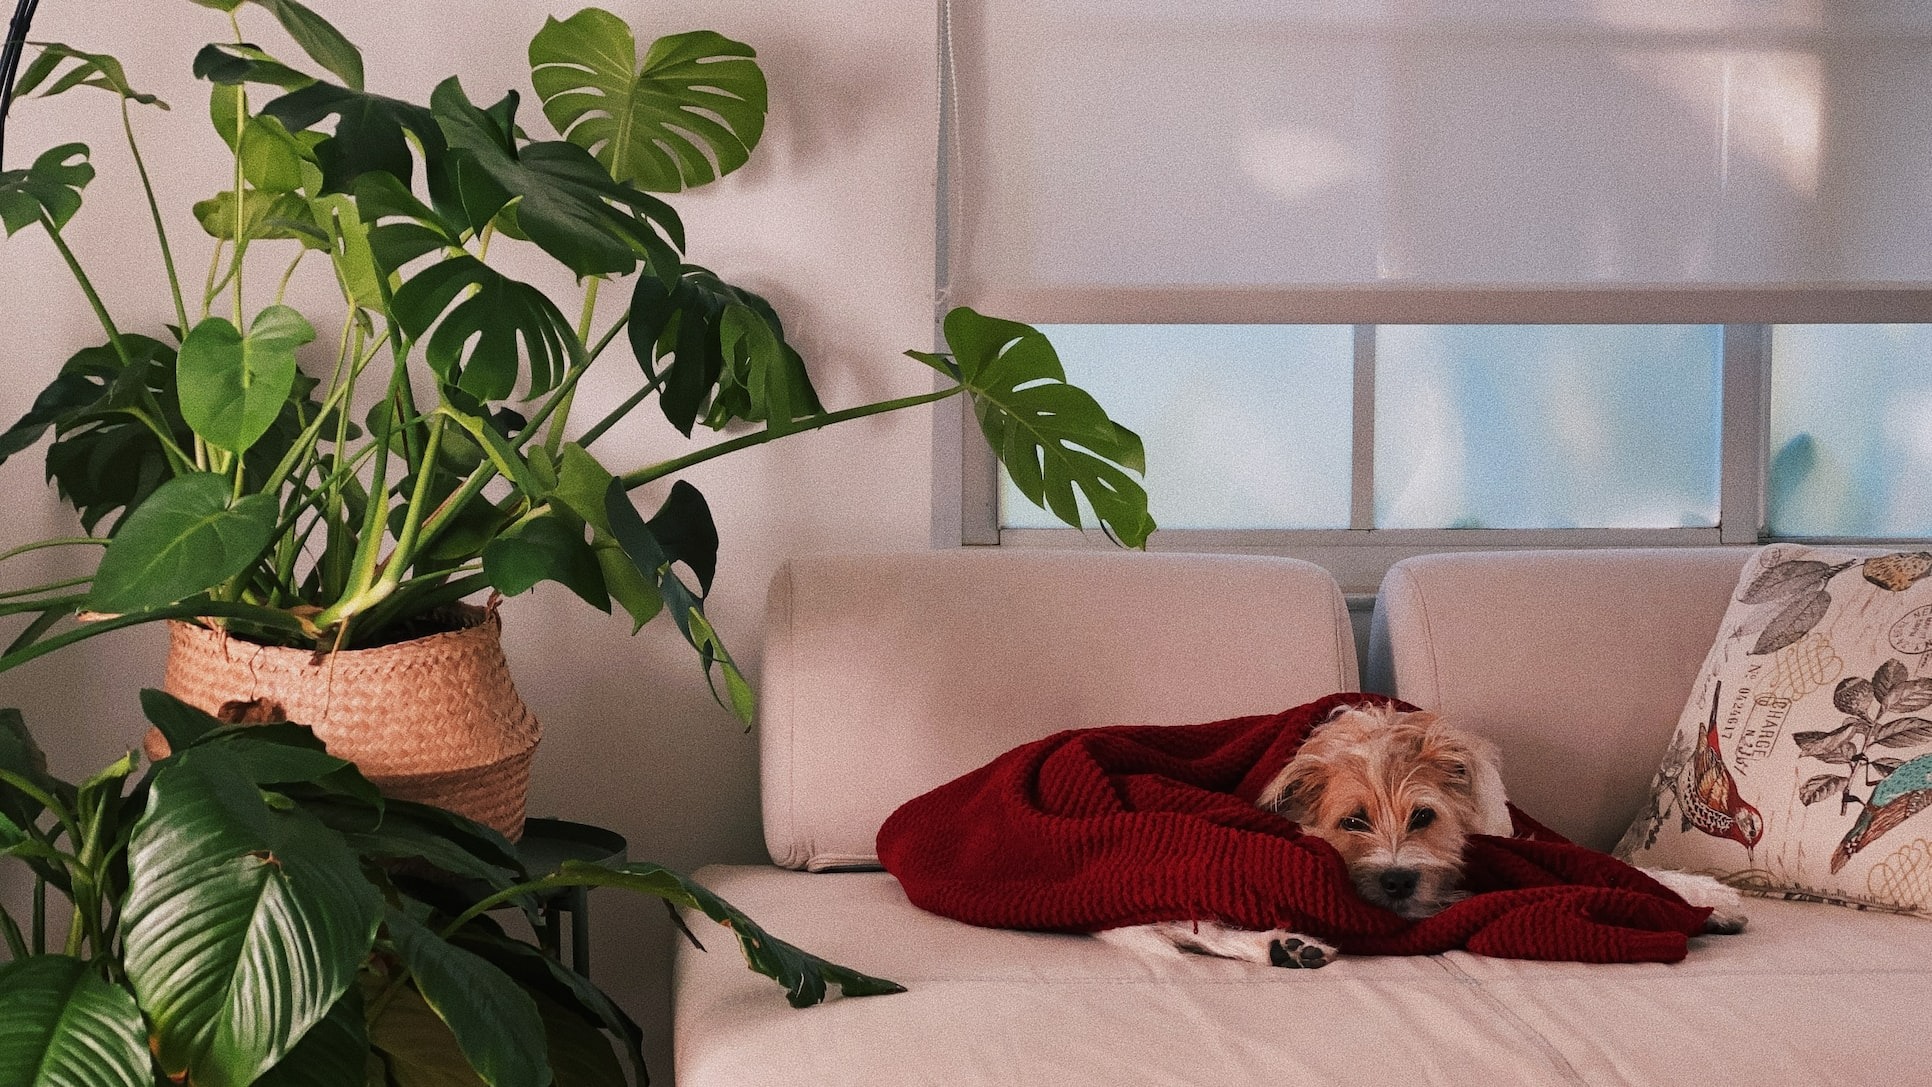 small mature dog lounging on a white sofa cozied up with a red blanket